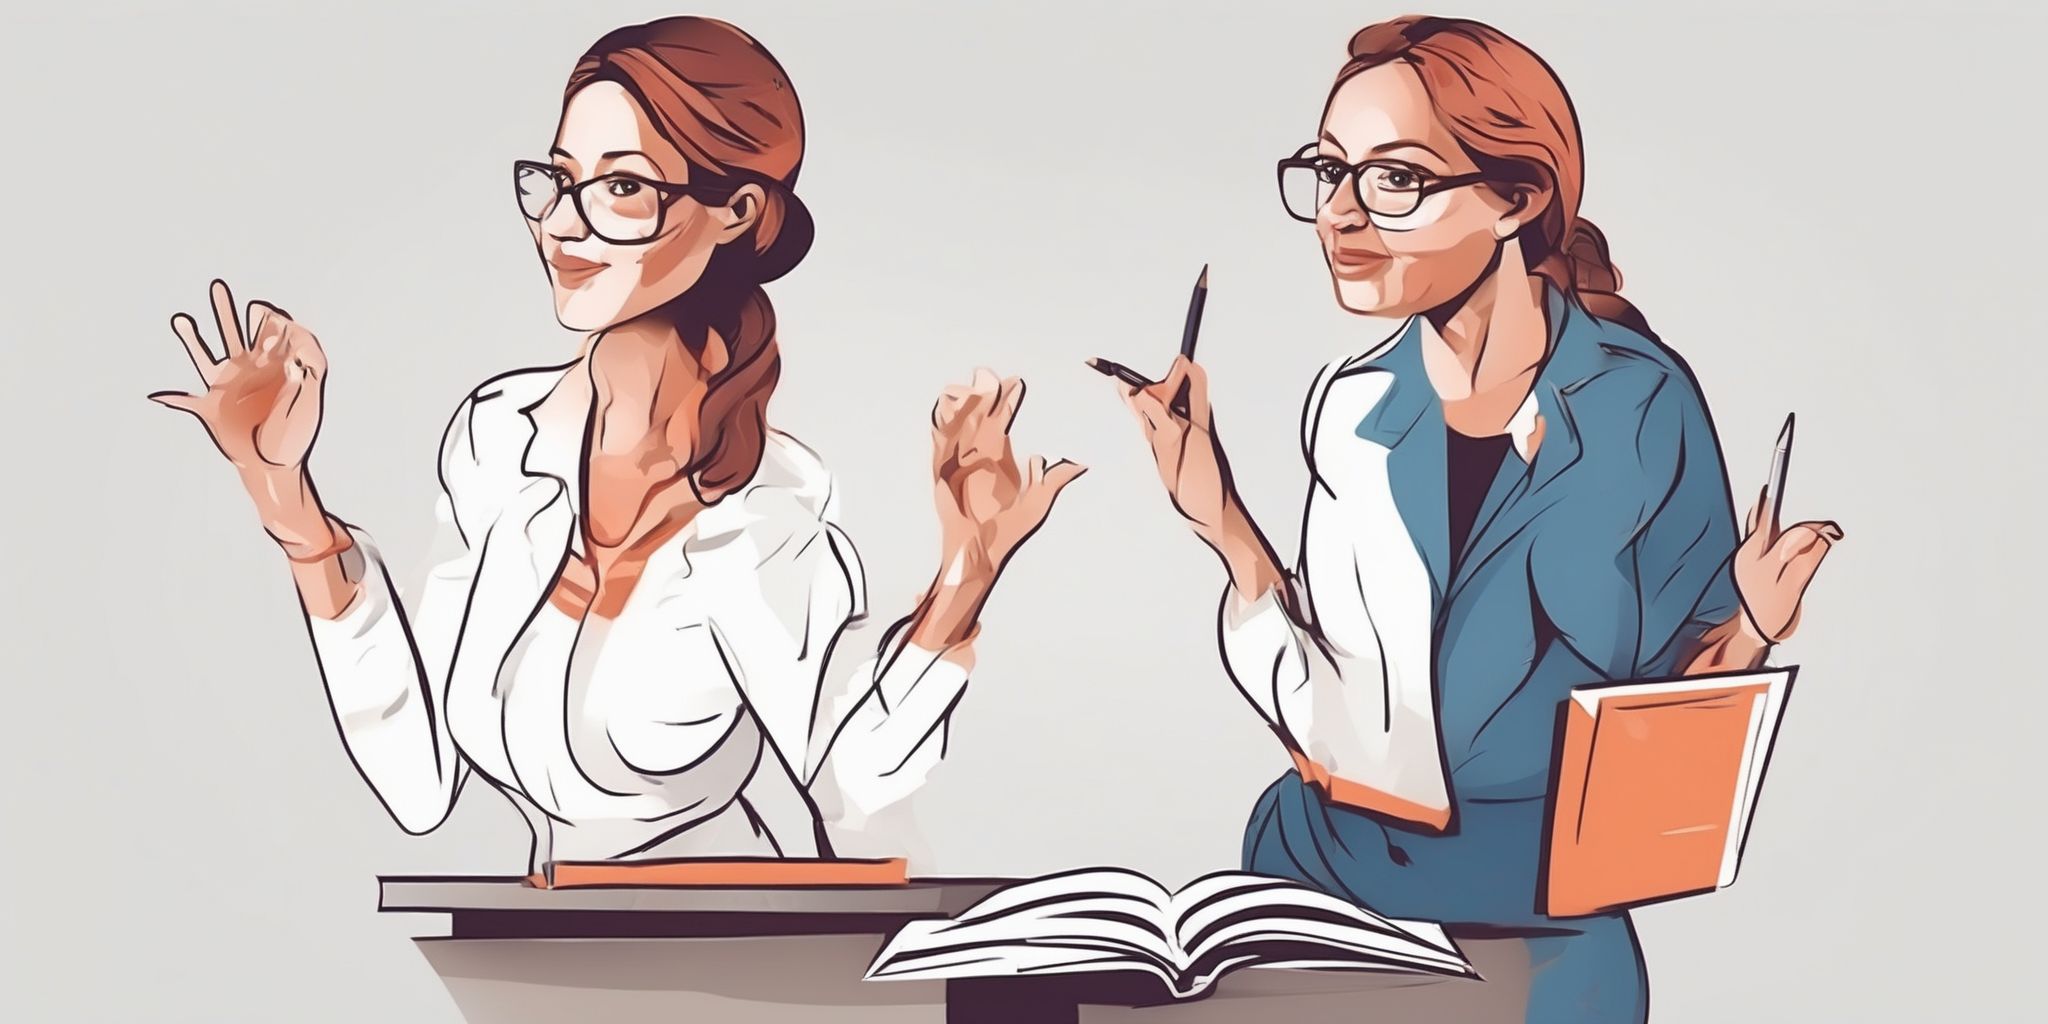 Teacher in illustration style with gradients and white background